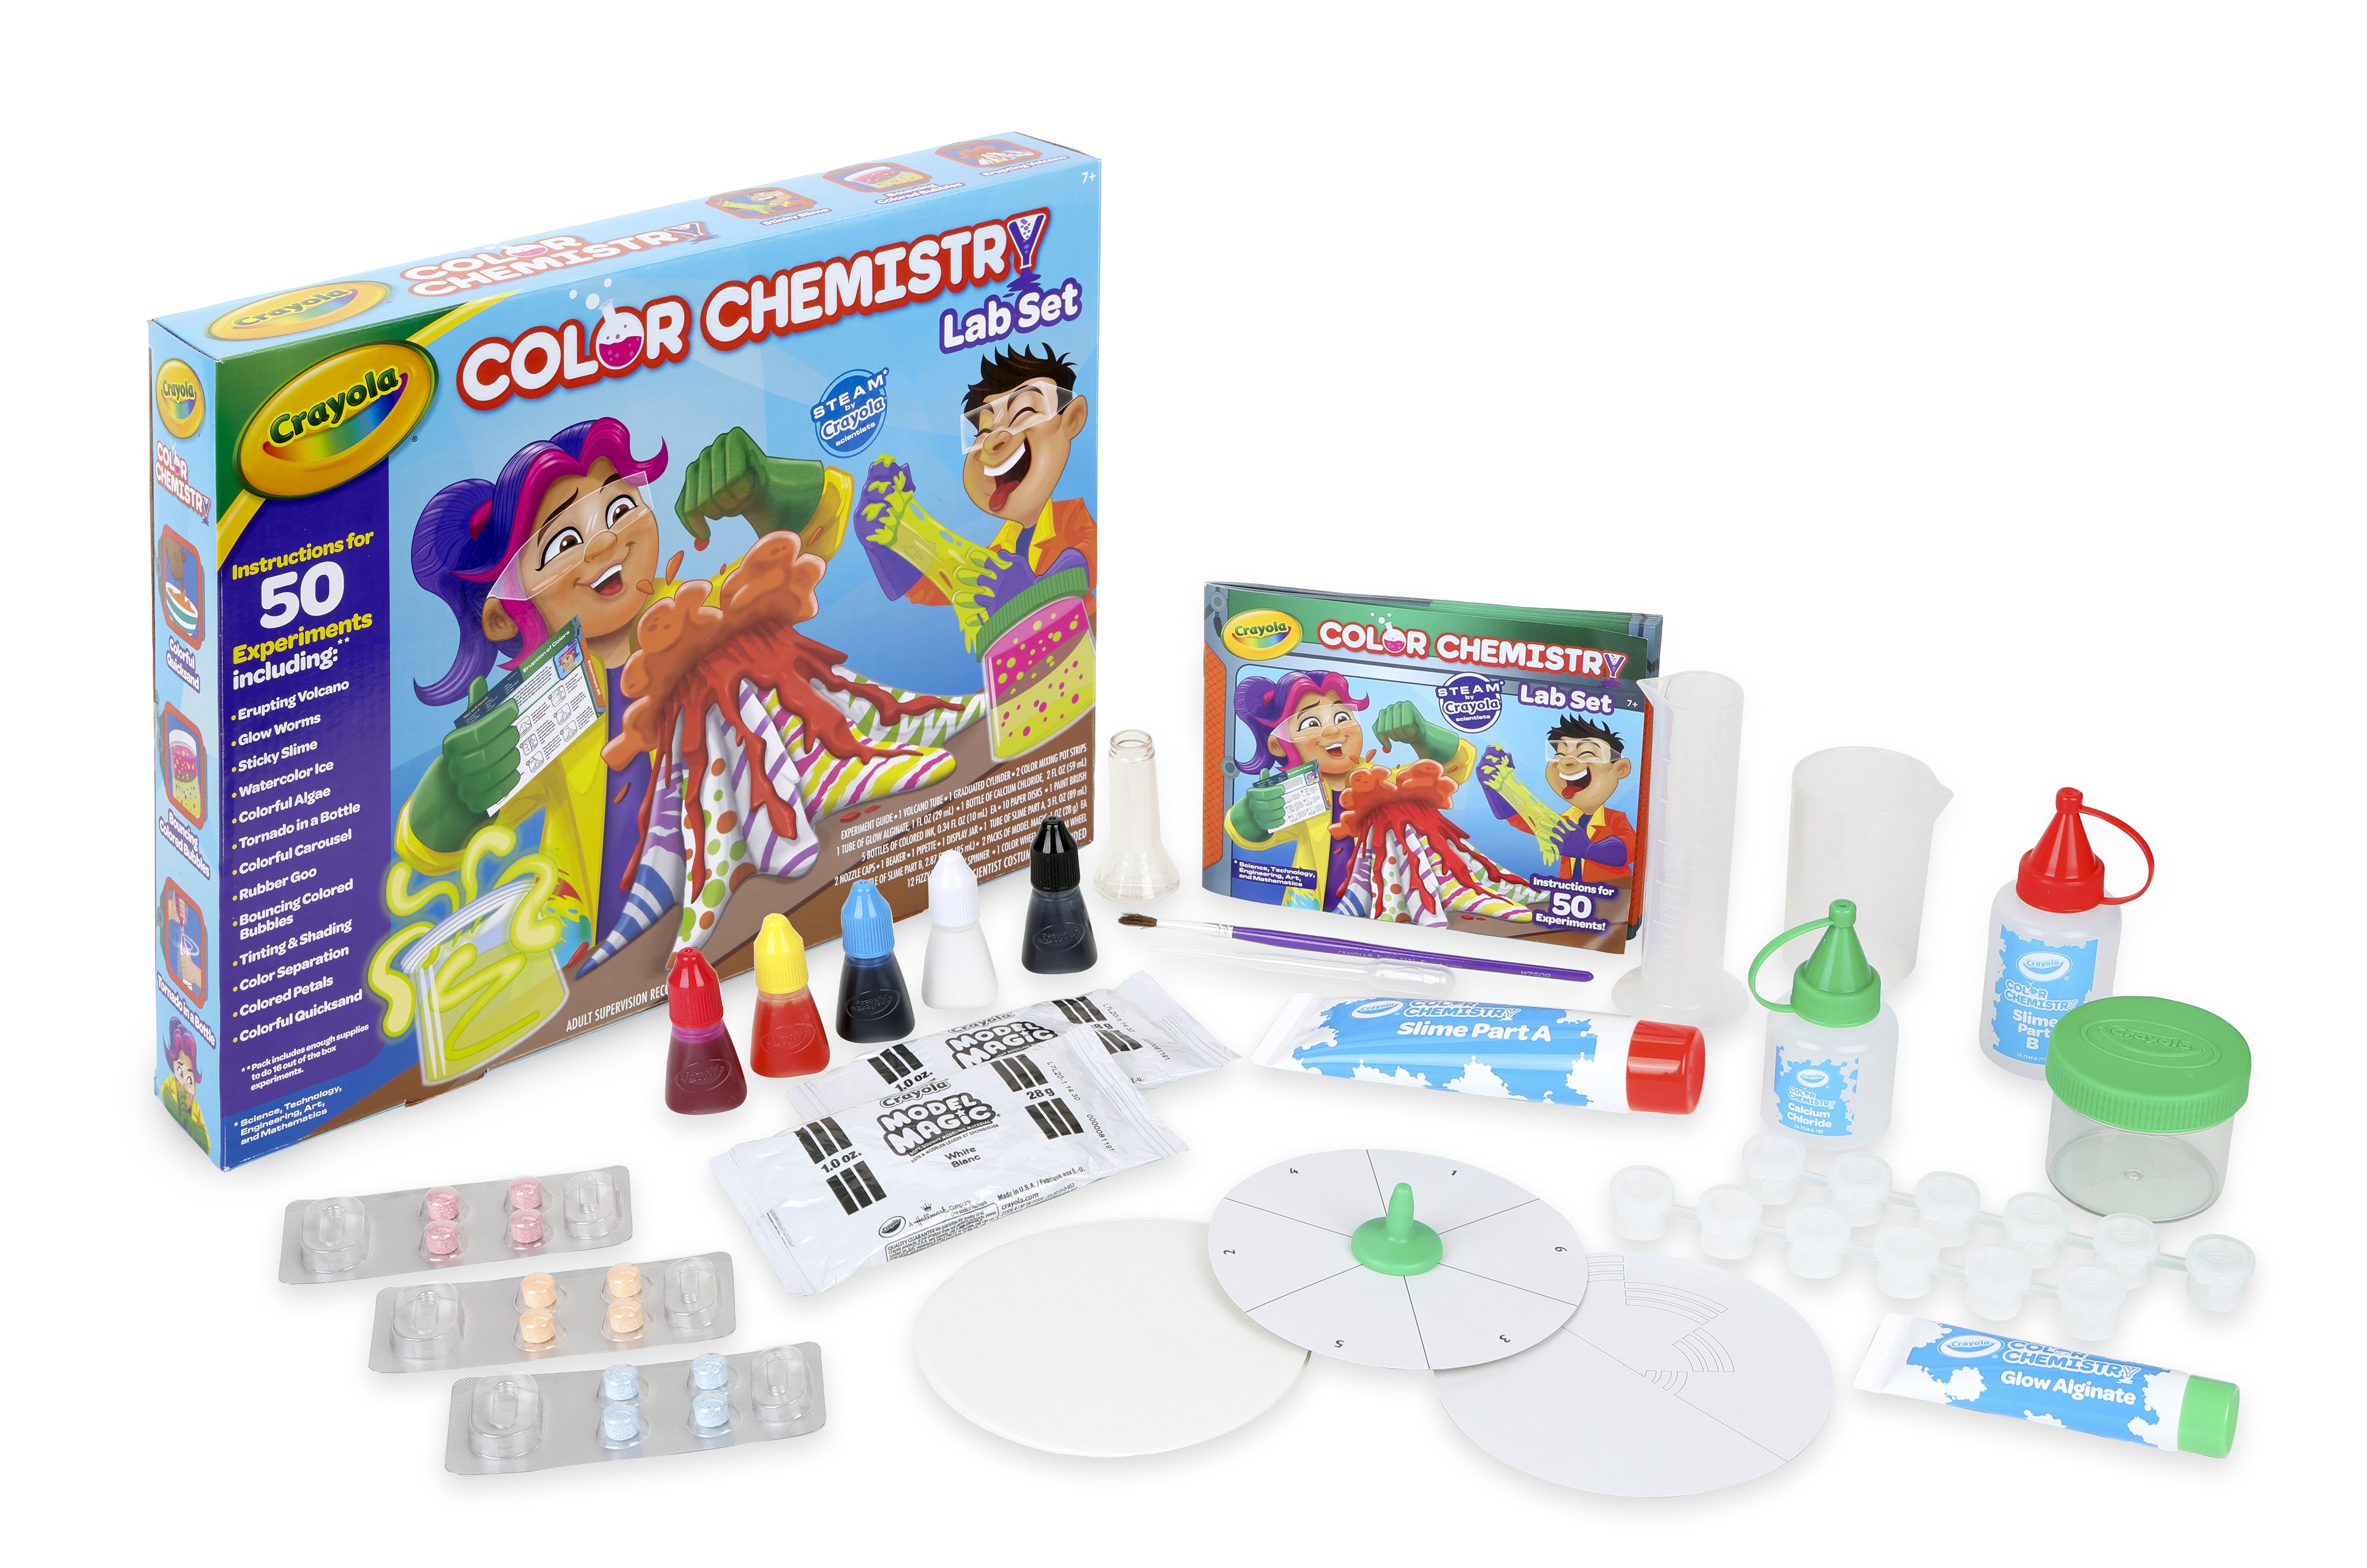 best stem toys for 7 year olds